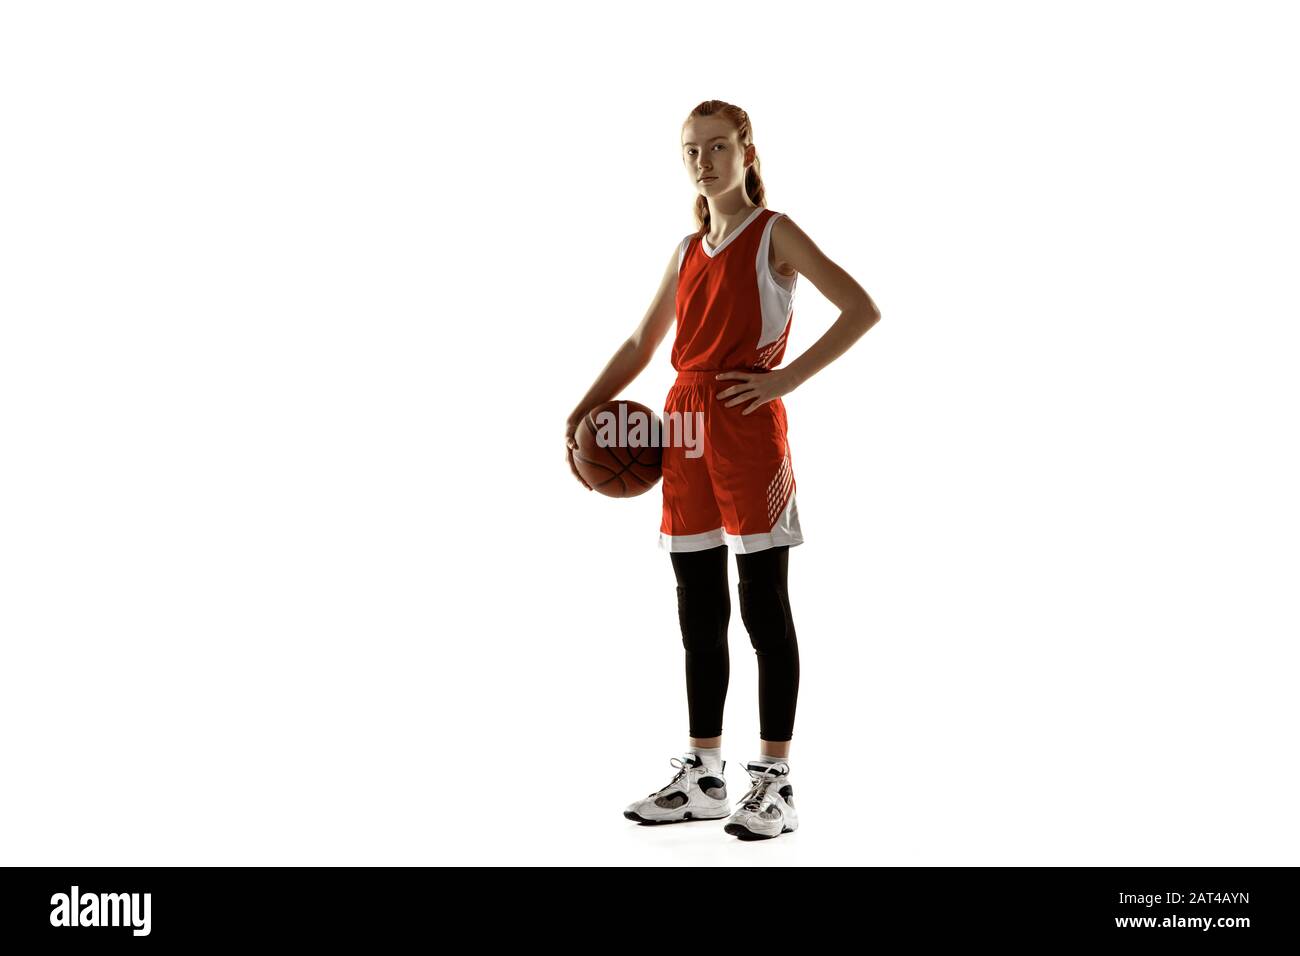 Image Cute Cheerleader Woman Isolated White Wall Background Holding  Basketball Stock Photo by ©Vadymvdrobot 366237090